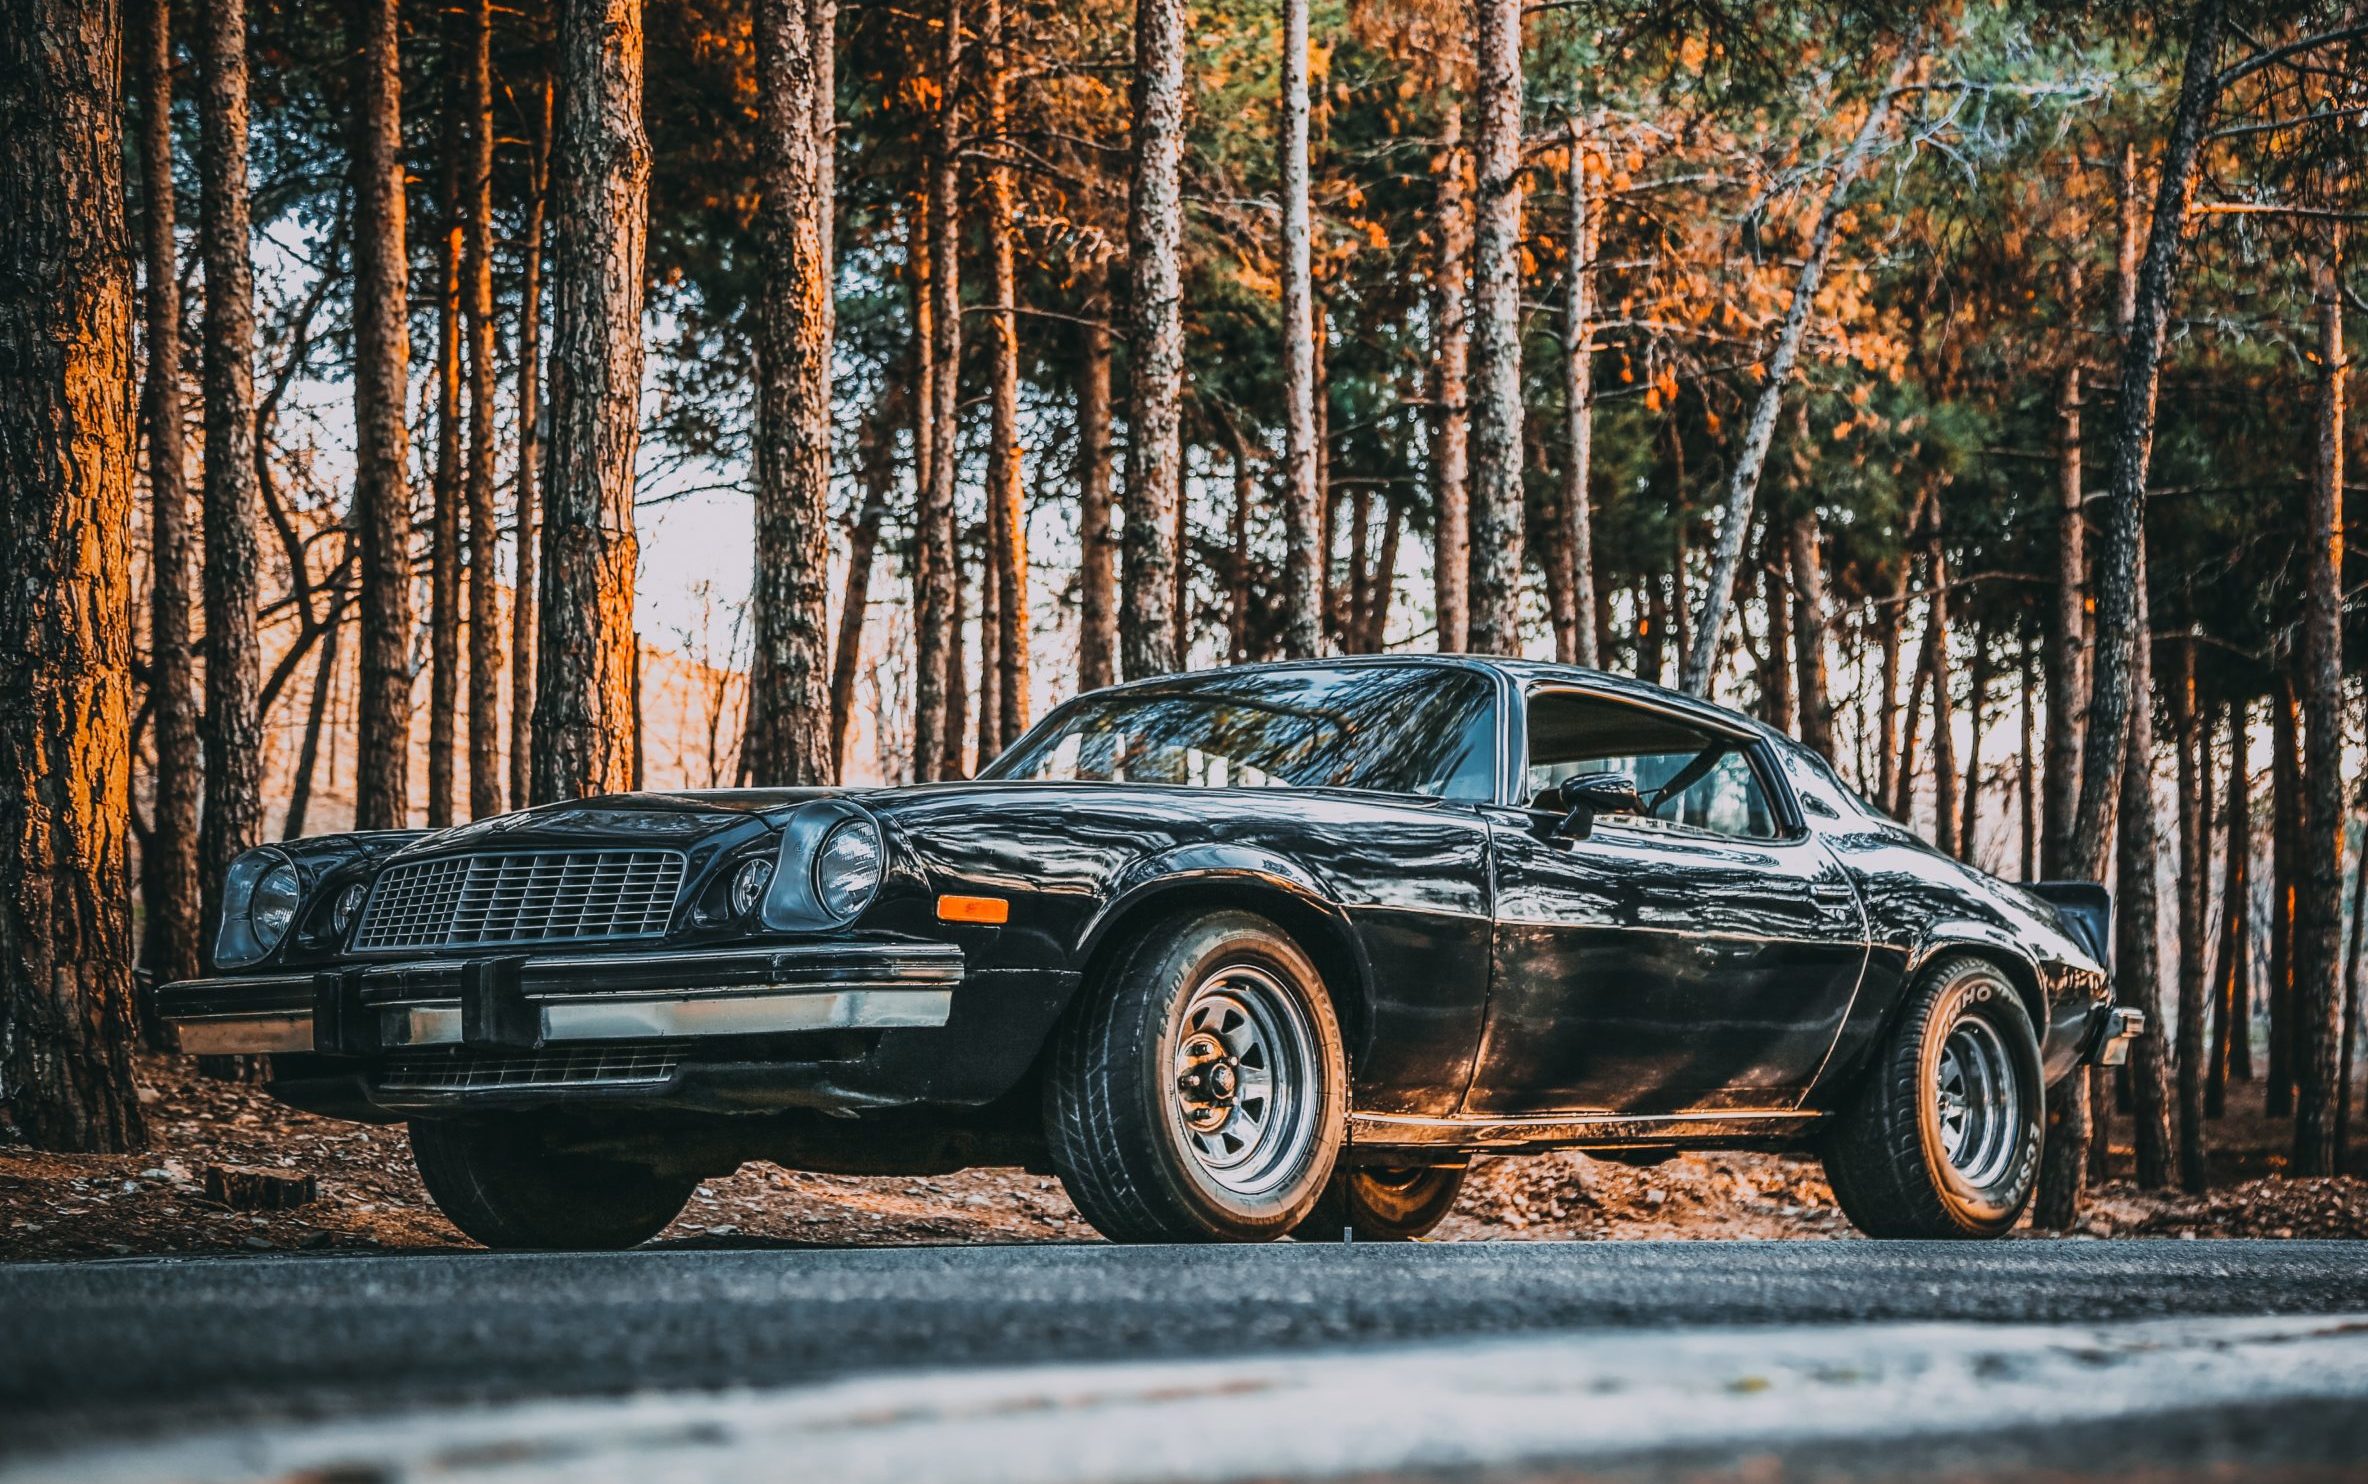 Chevy Camaro in the woods.